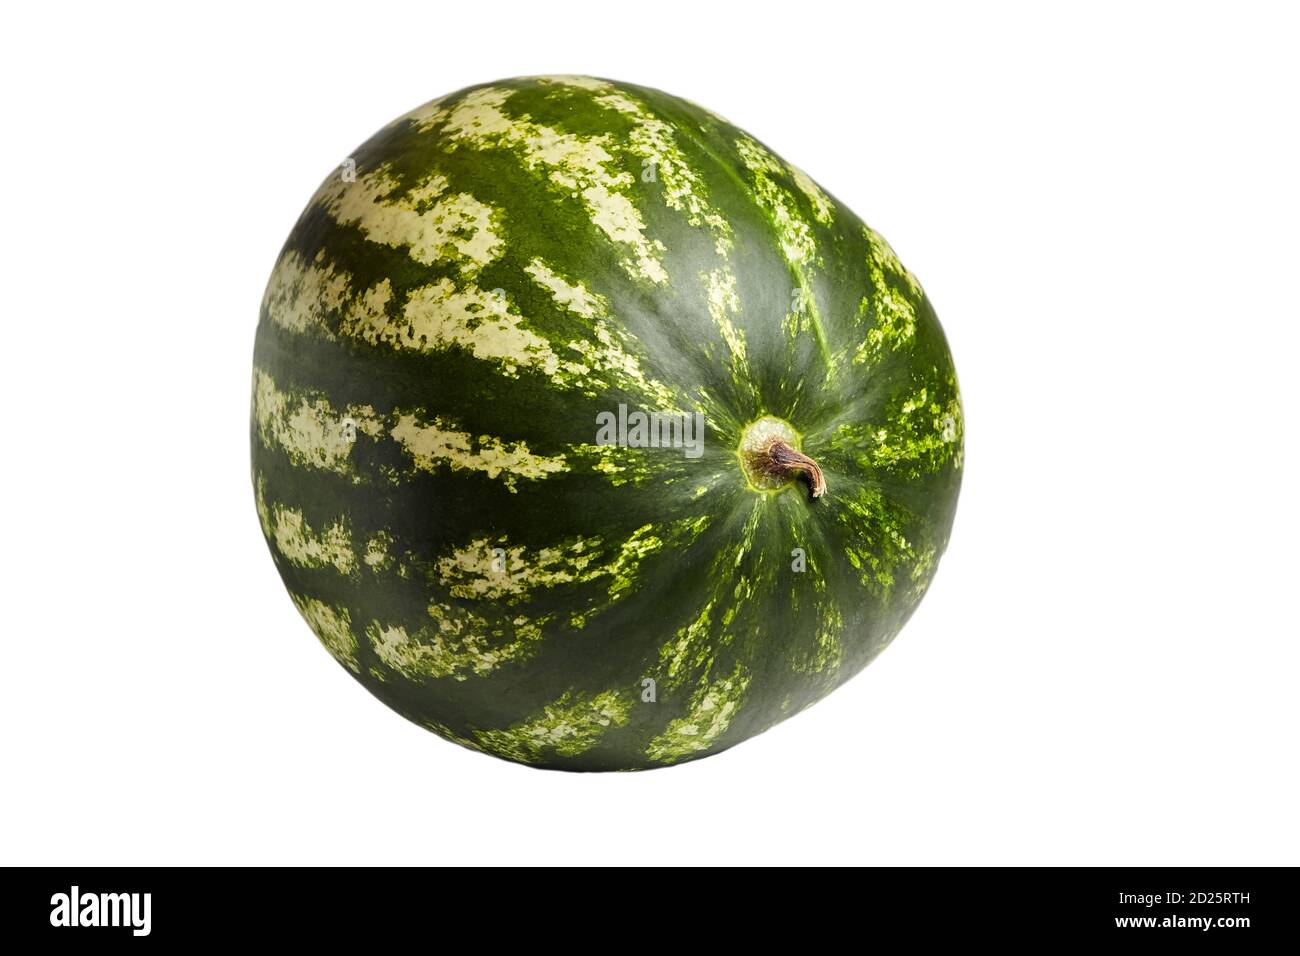 Whole watermelon berry with green striped peel isolated on white background. Gourd culture has a strong diuretic property Stock Photo